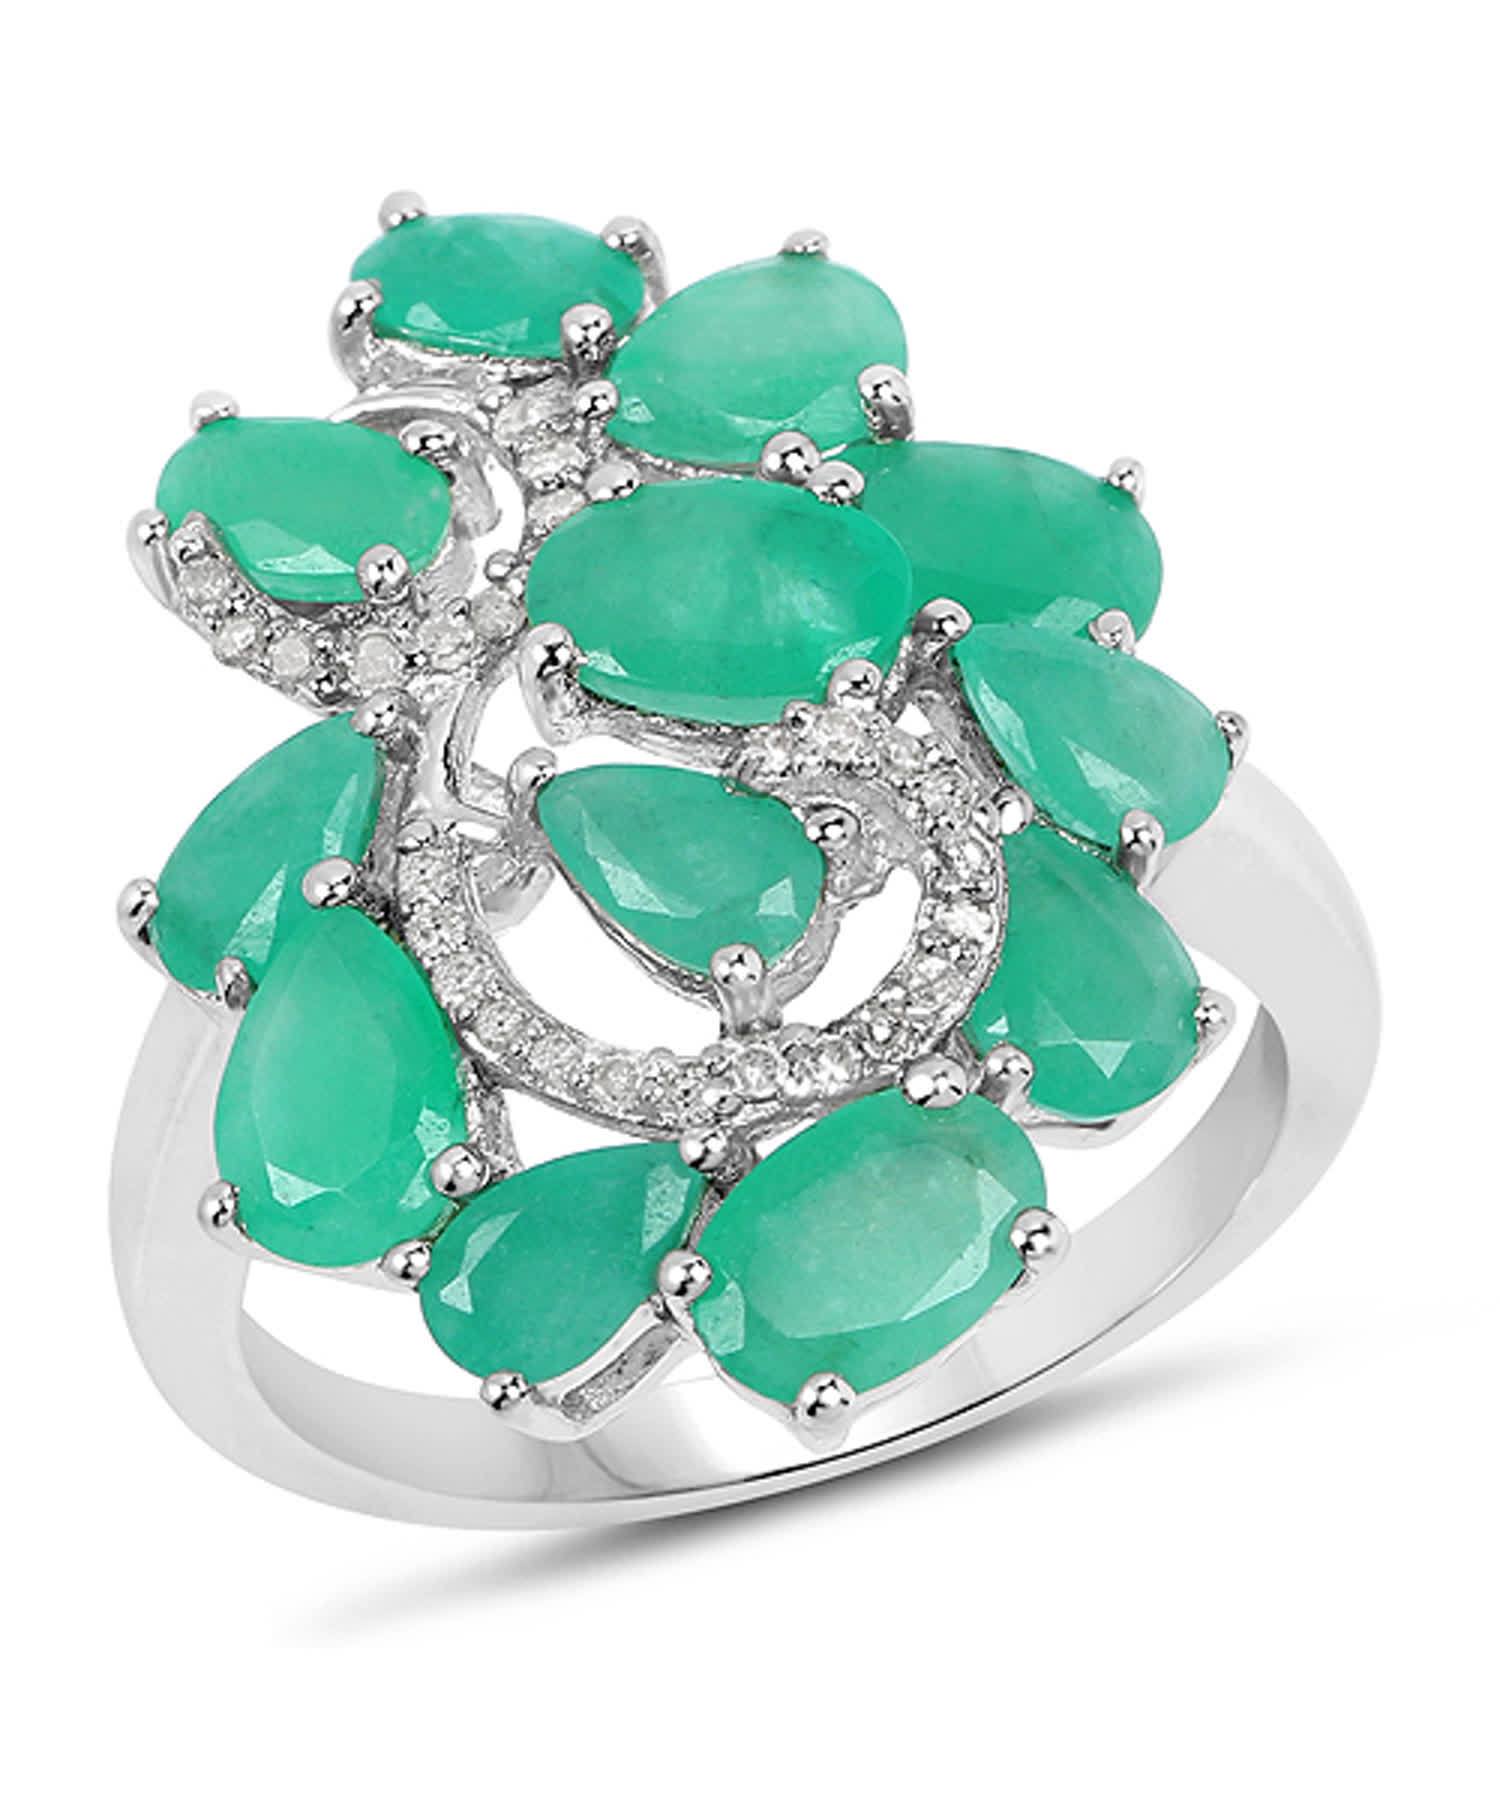 3.57ctw Natural Emerald and Diamond Rhodium Plated 925 Sterling Silver Cocktail Ring View 1